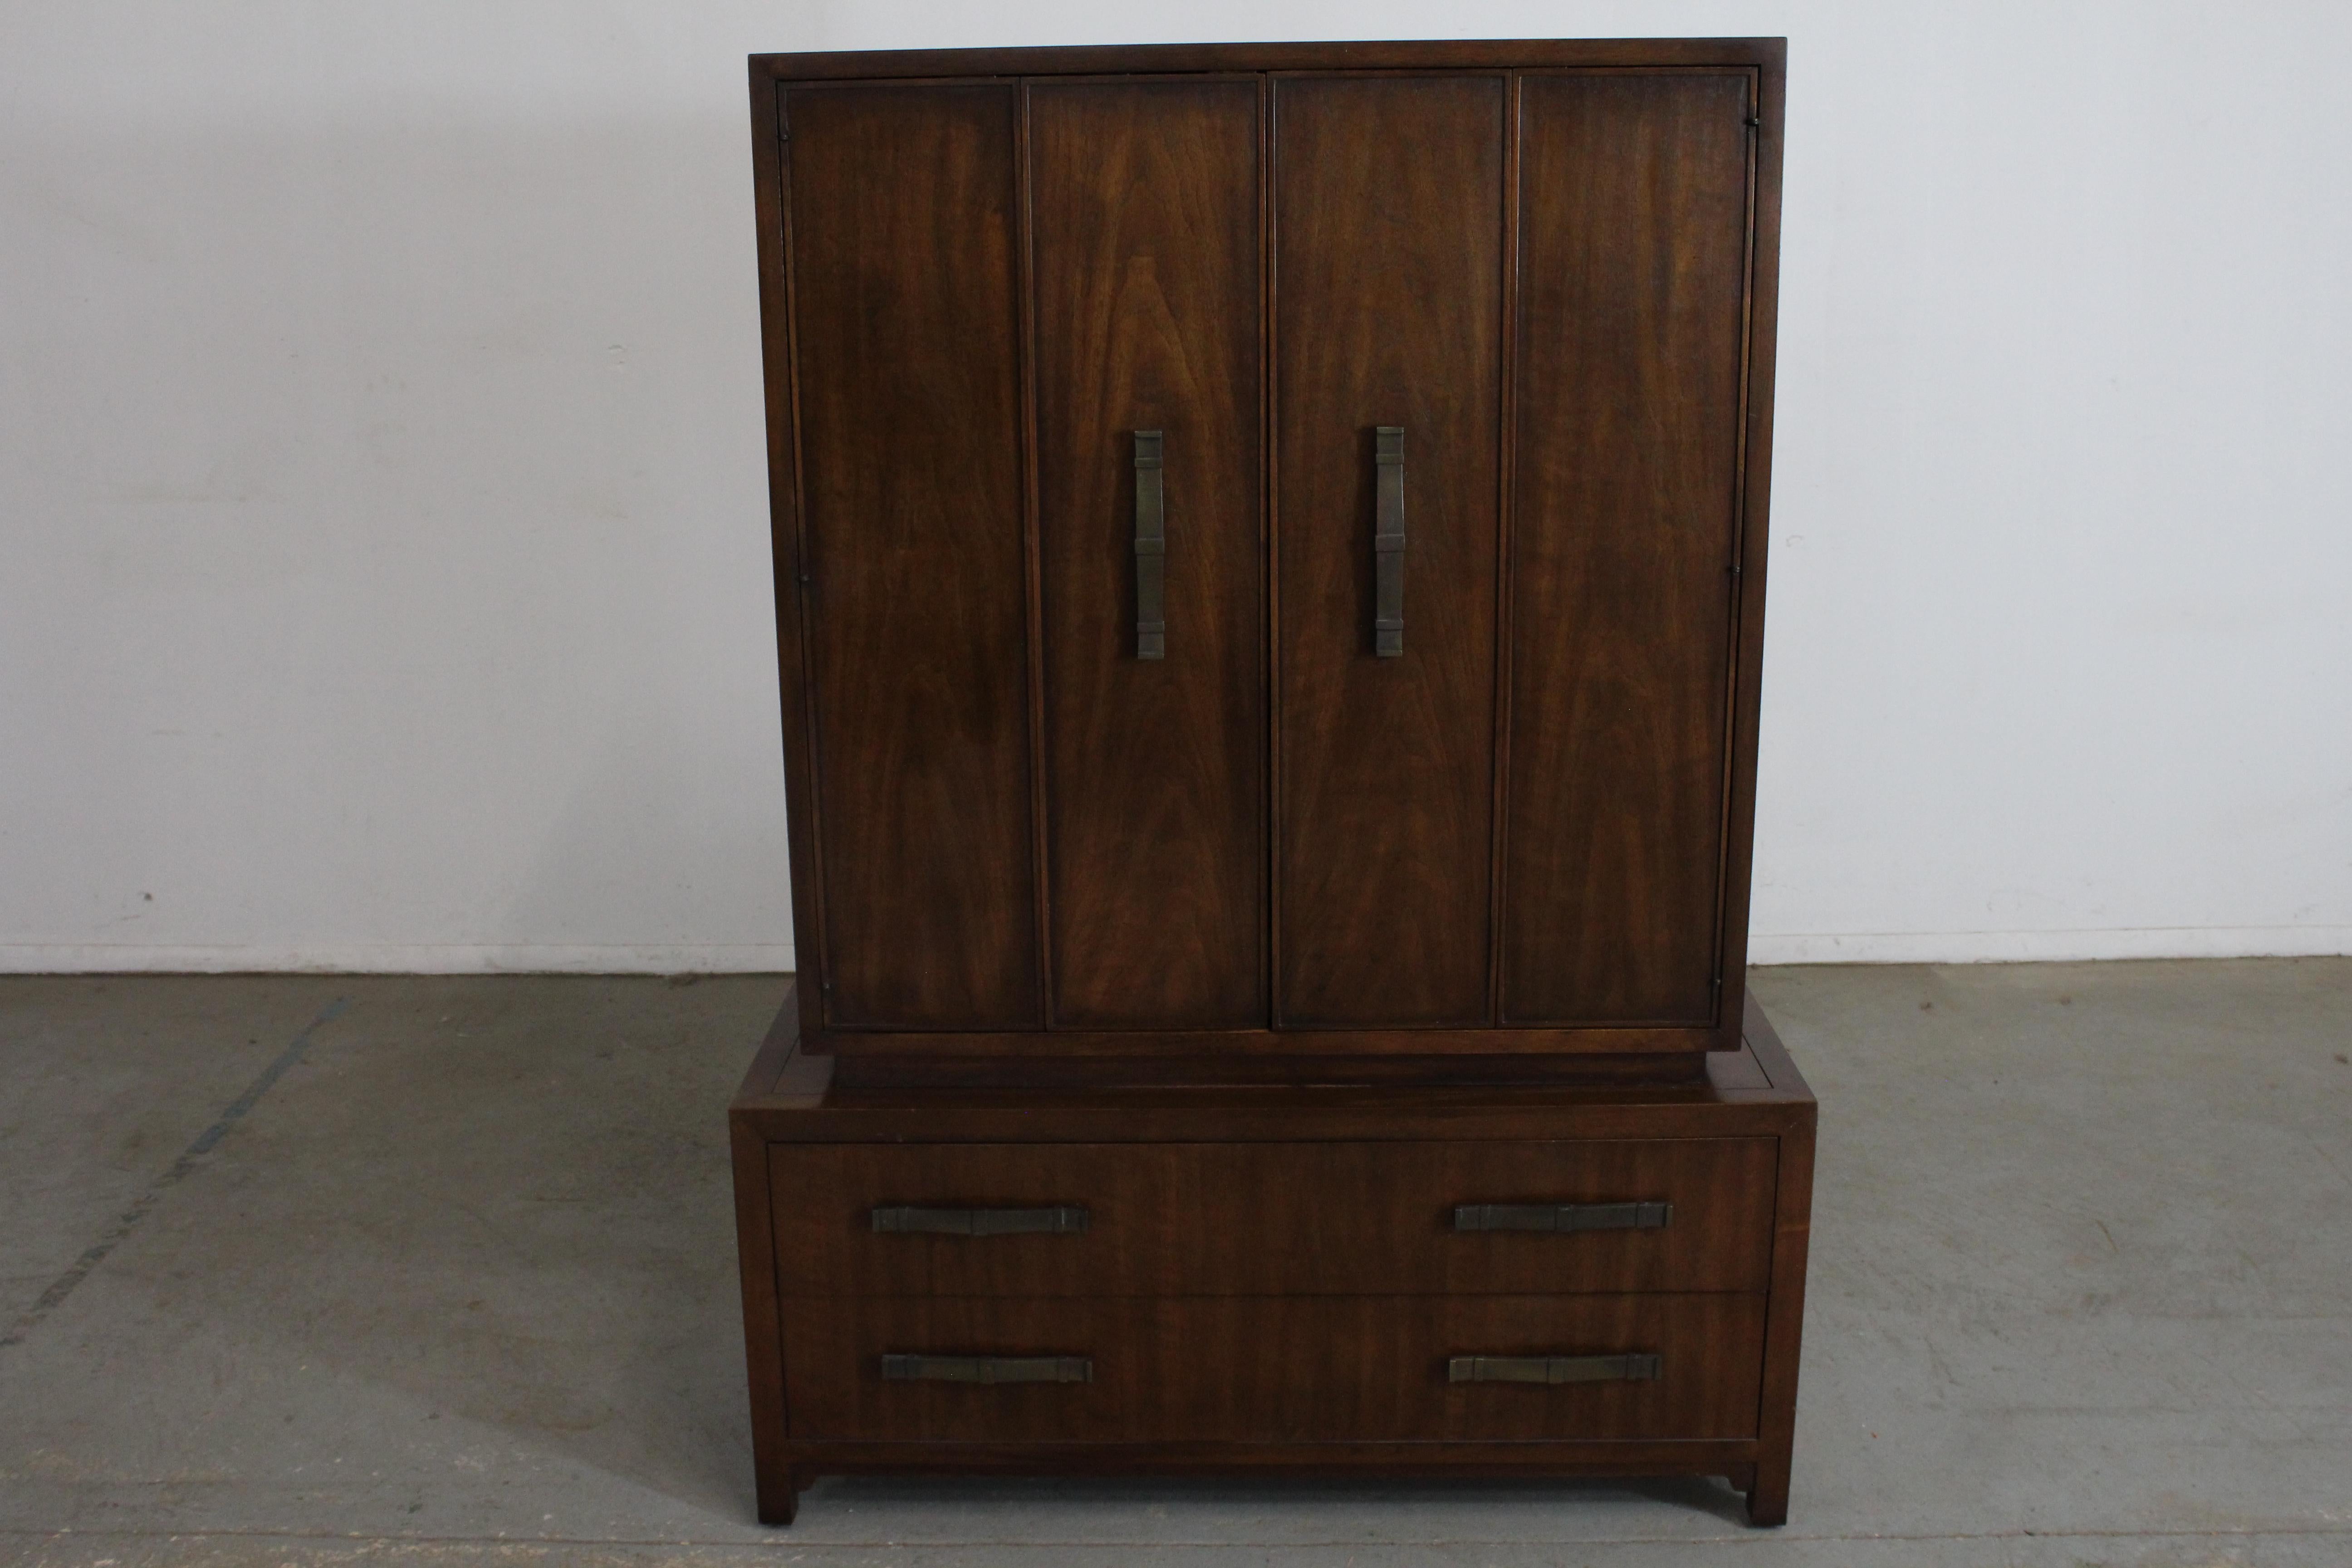 Mid-Century Modern Asian Gentleman's Tall Chest on Chest by Heritage

Offered is an excellent example of Asian mid-century modern design; a Black Mahogany chest from the 1960's. Features a Chest on Chest with 2 drawers on the bottom. The top section